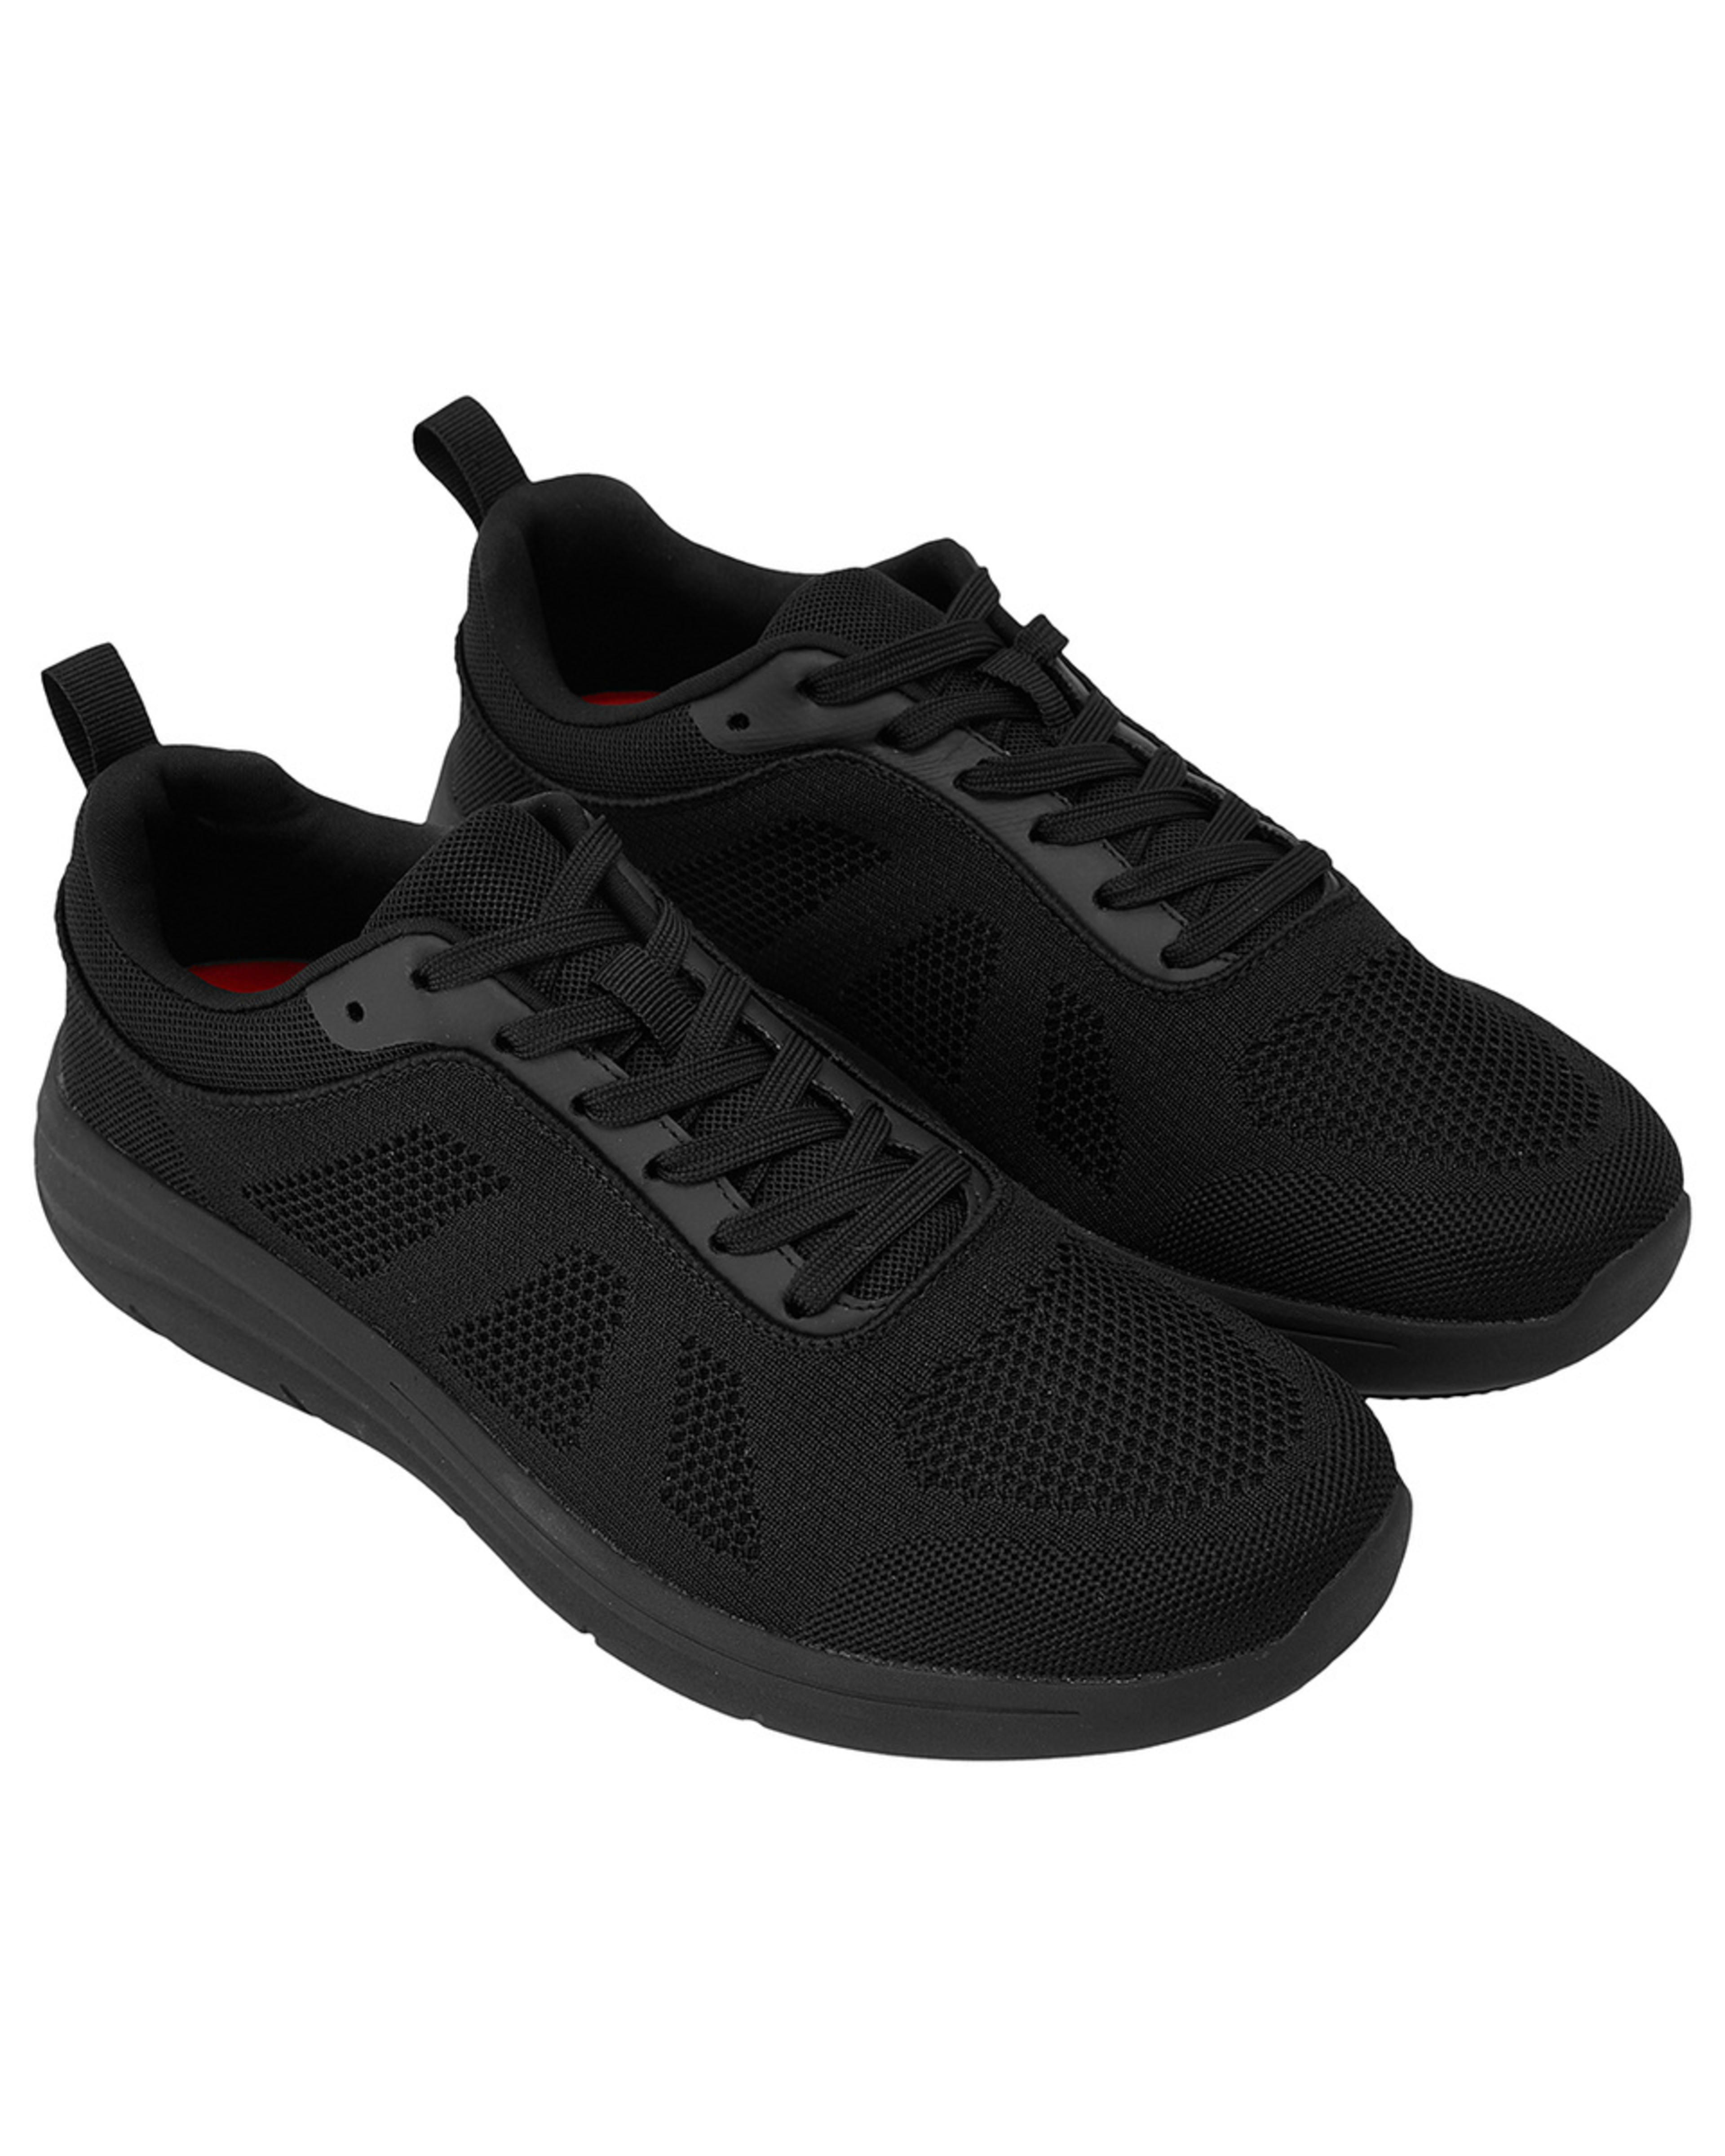 Slip Resistant Lace Up Sneakers - Kmart